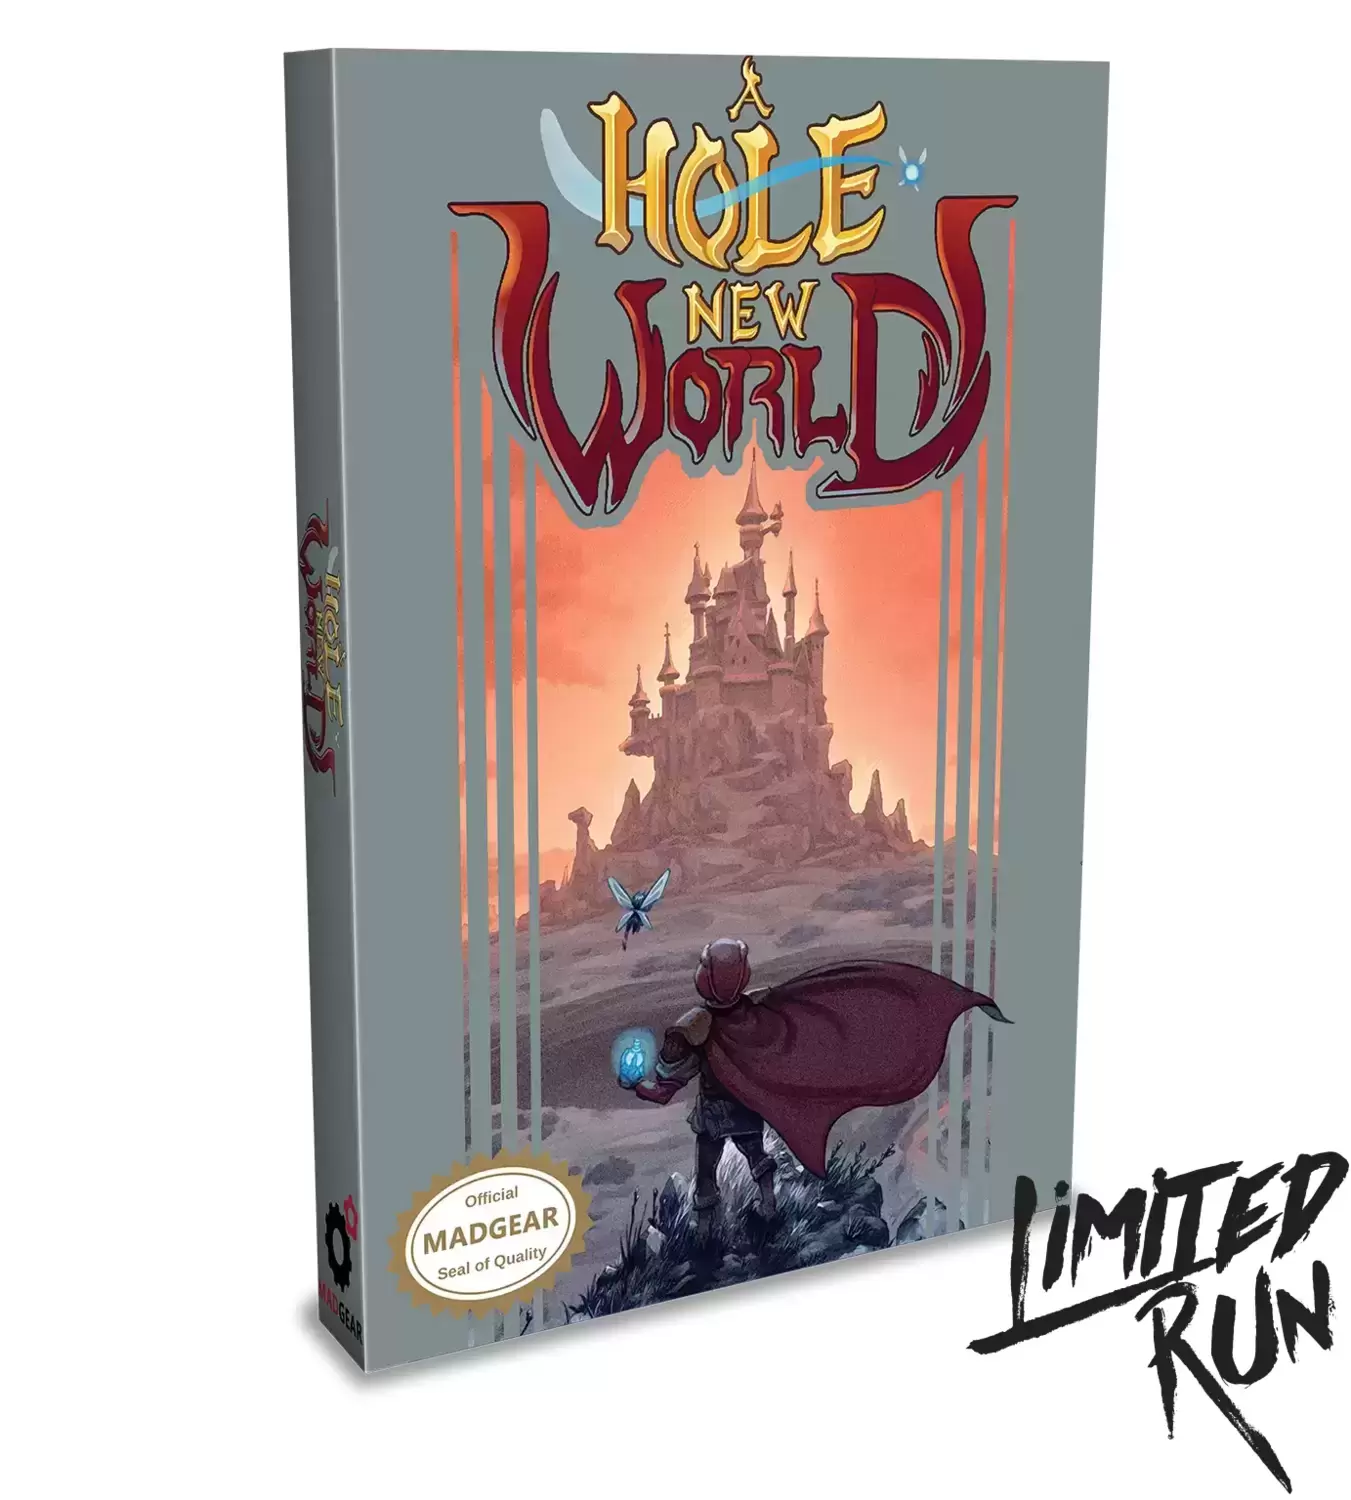 Nintendo NES - A Hole New World Soundtrack - Limited Run Games